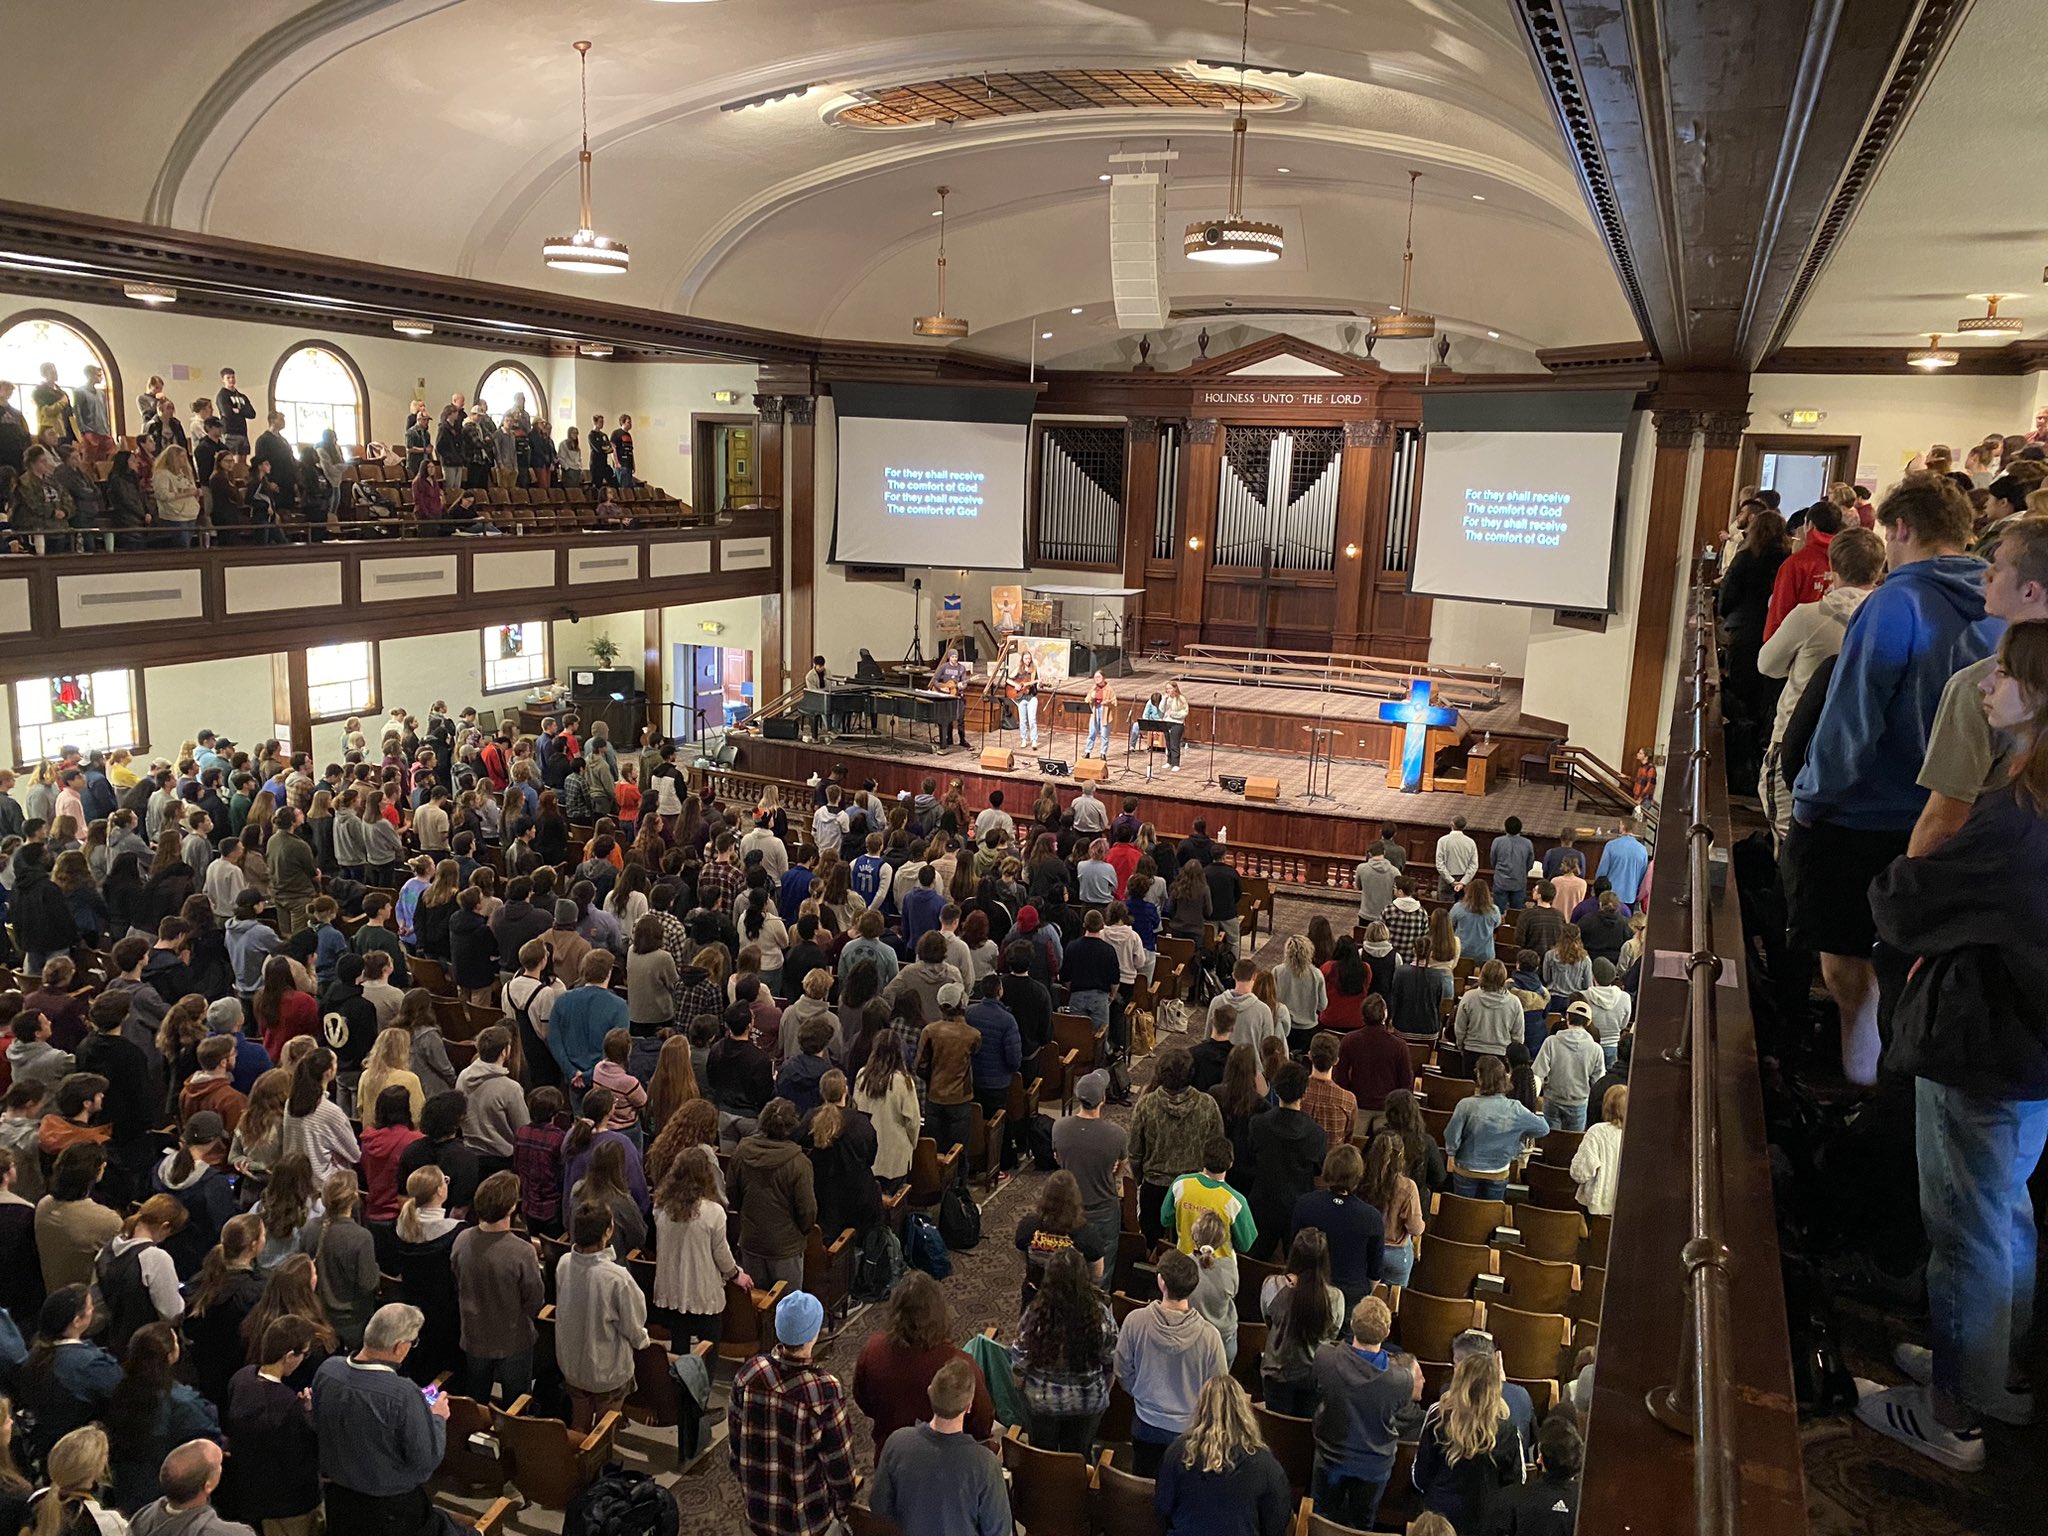 Asbury University revival comes to an end